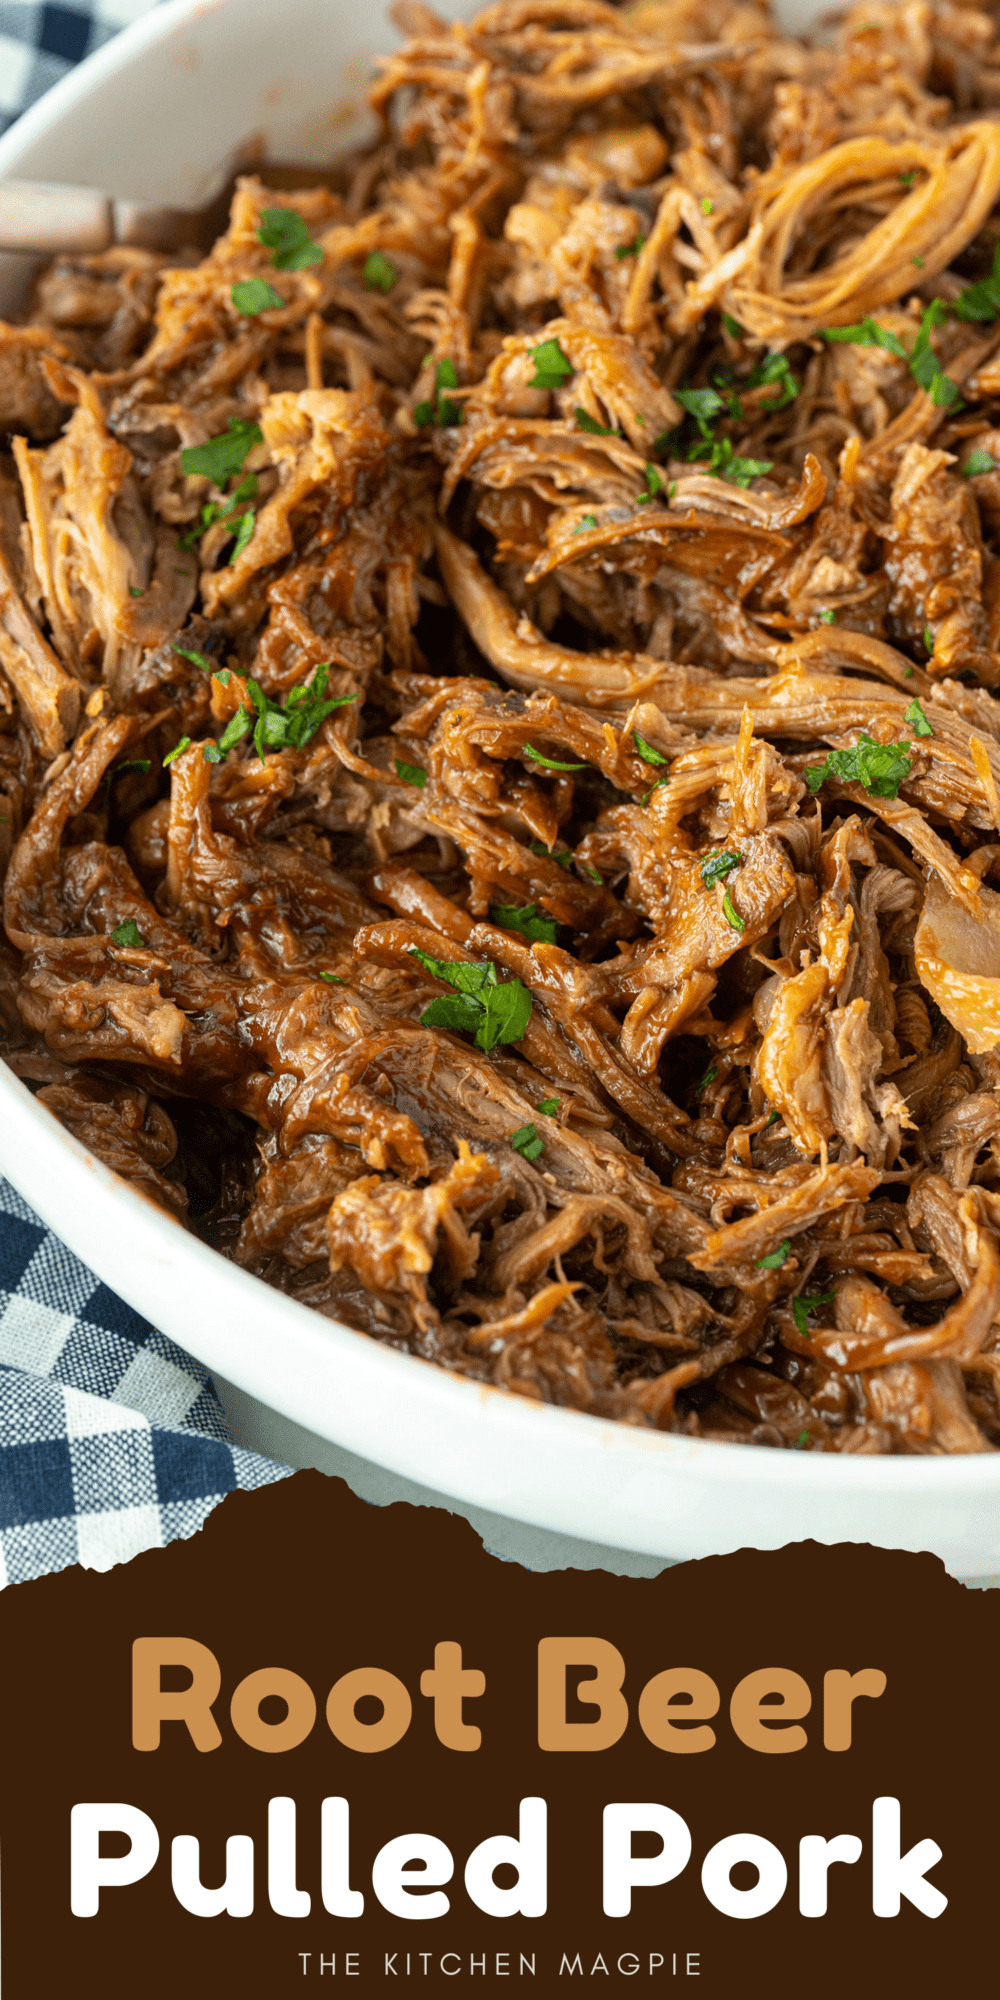 Delicious and incredibly easy 3 ingredient root beer pulled pork done in the slow cooker for pulled pork sandwiches, pulled pork nachos and more!